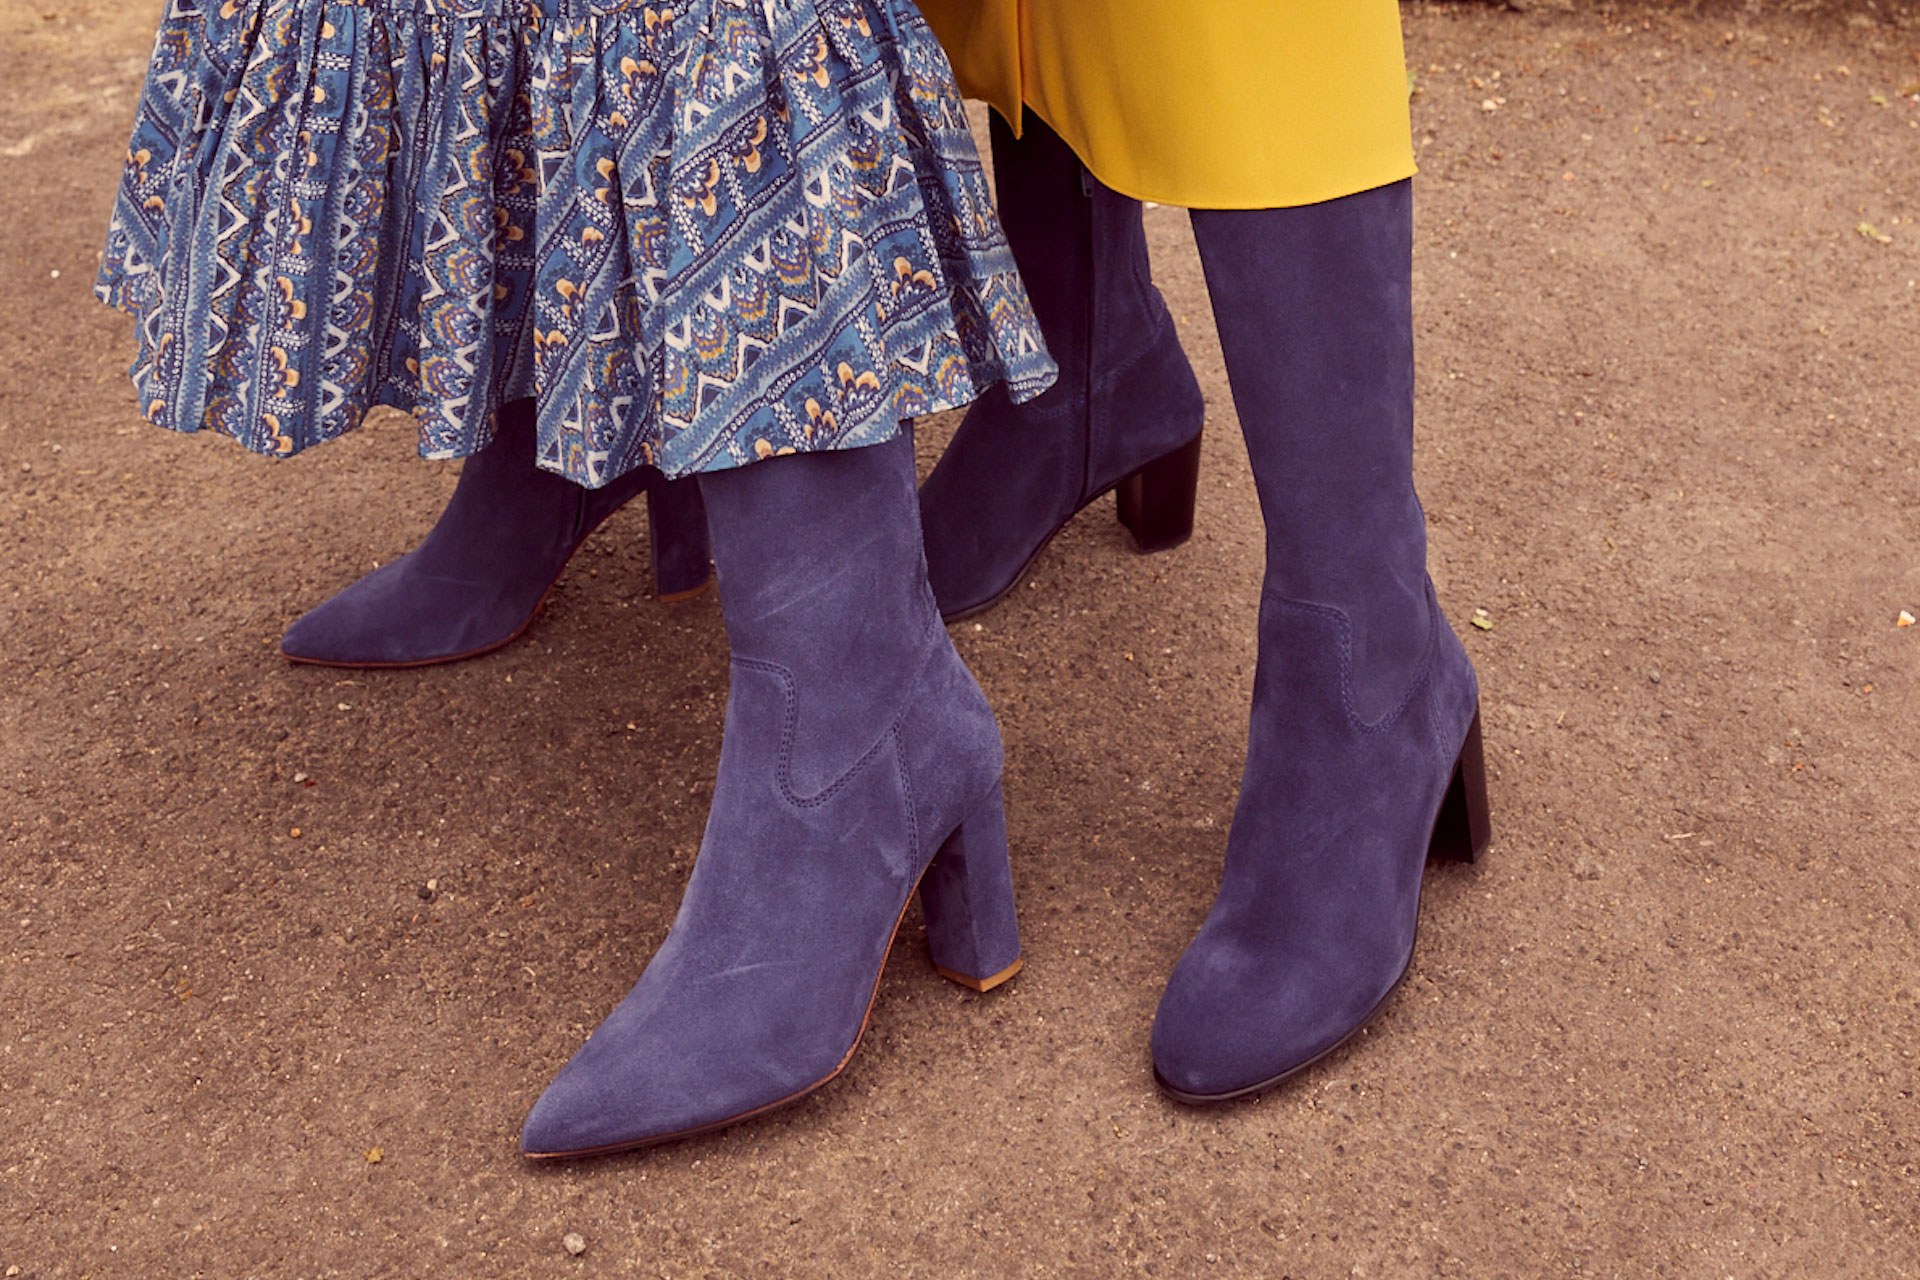 17 Stylish Pairs of Boots For Autumn & Winter